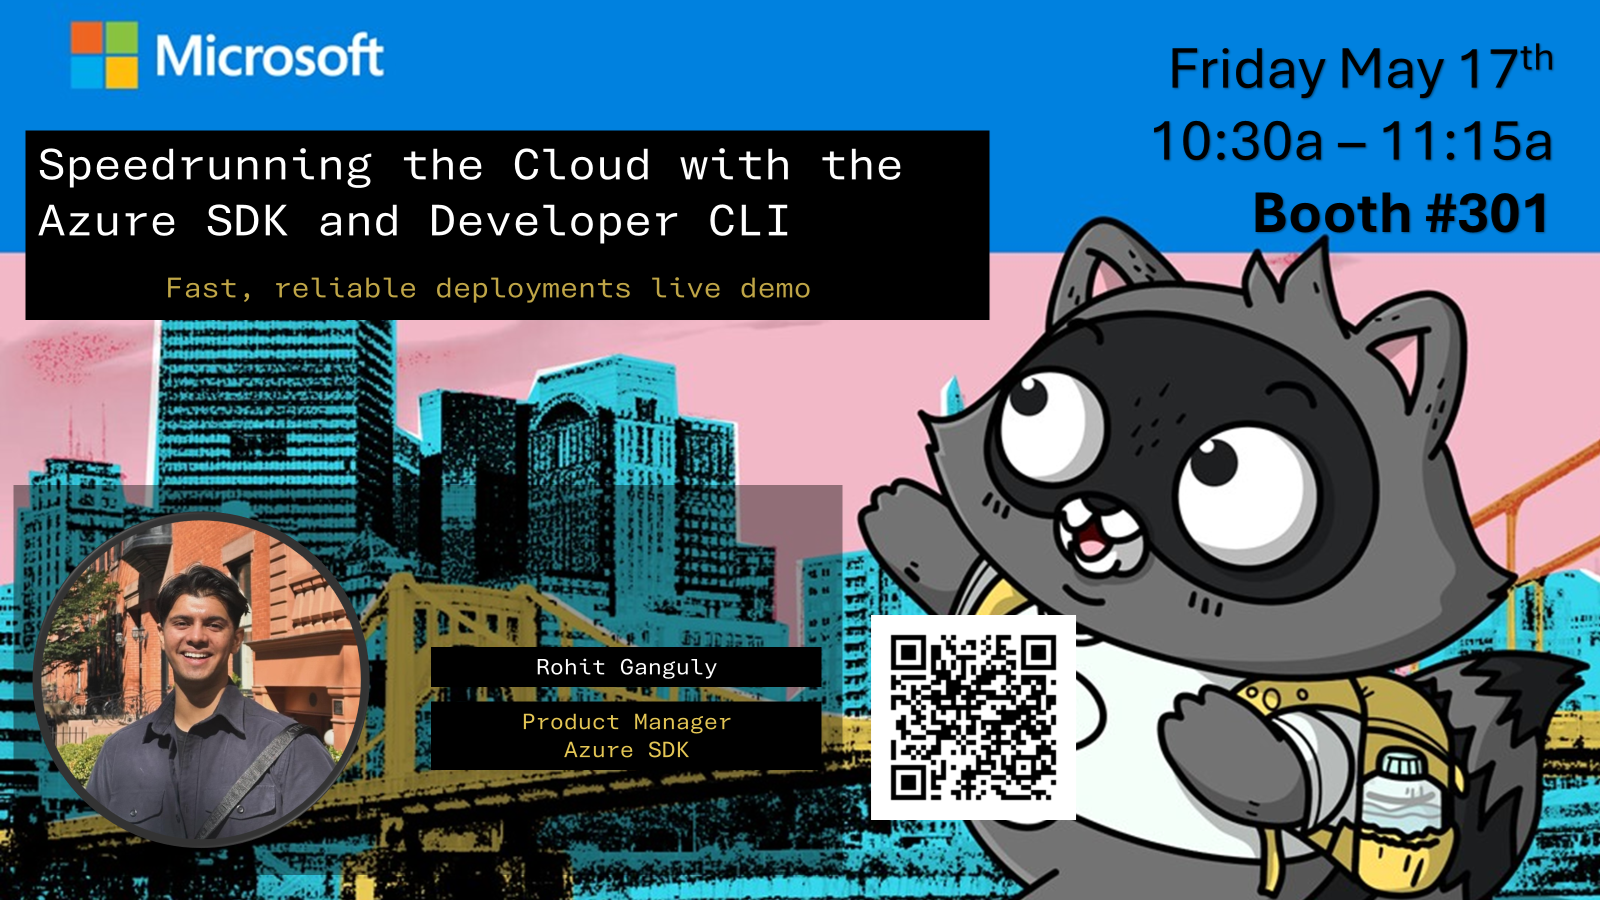 Bit our Cloud Mascot travelling through Pittsburgh showing our upcoming schedule